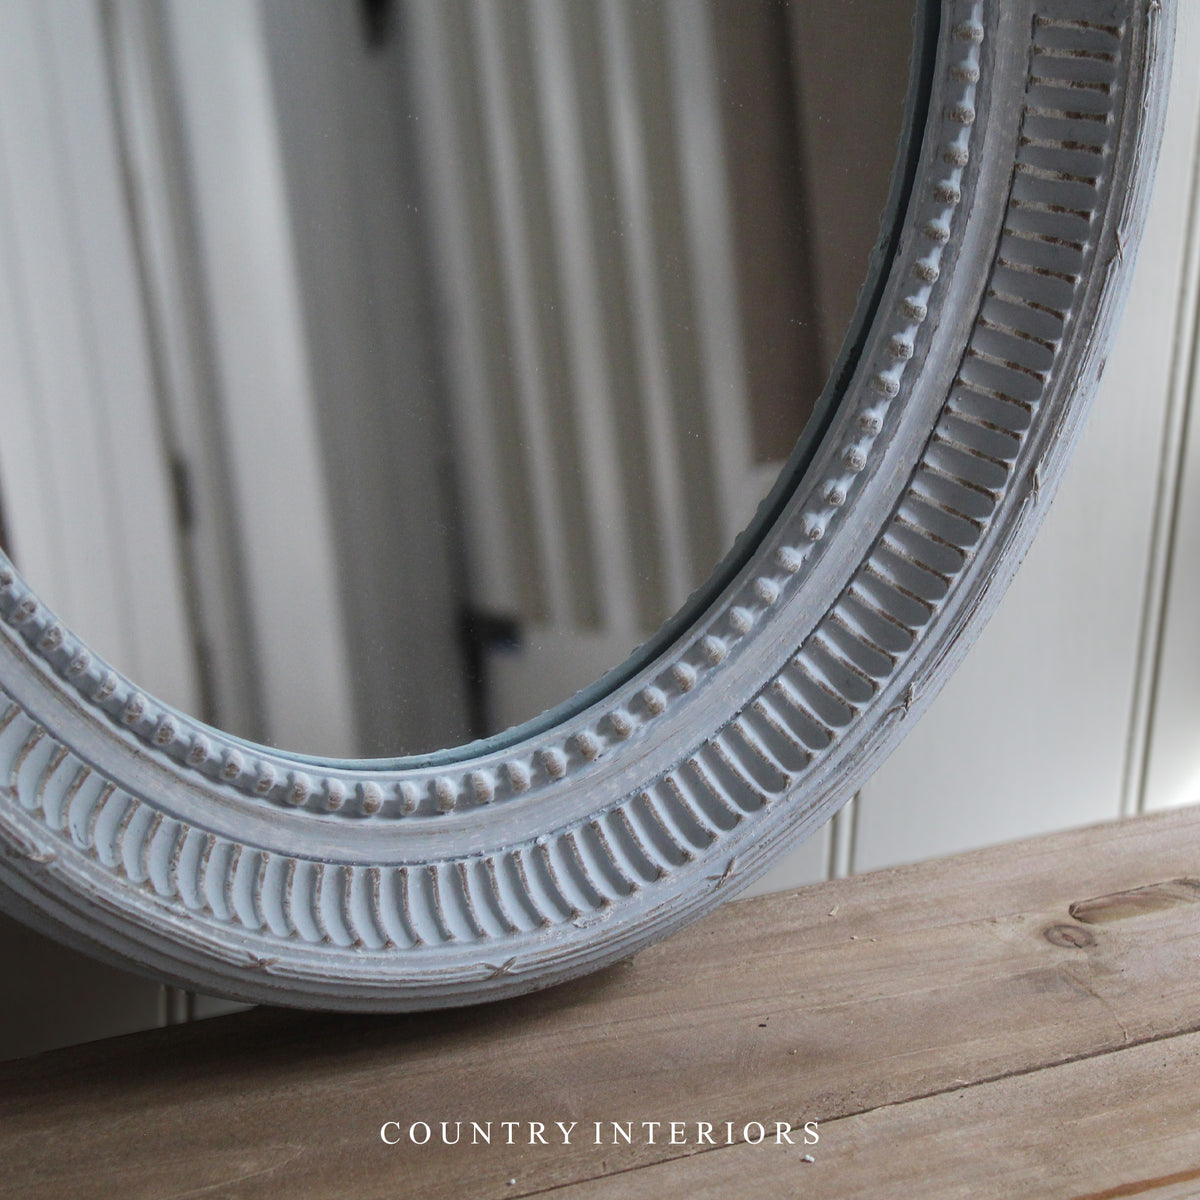 Oval Mirror in Soft Grey with Carved Frame